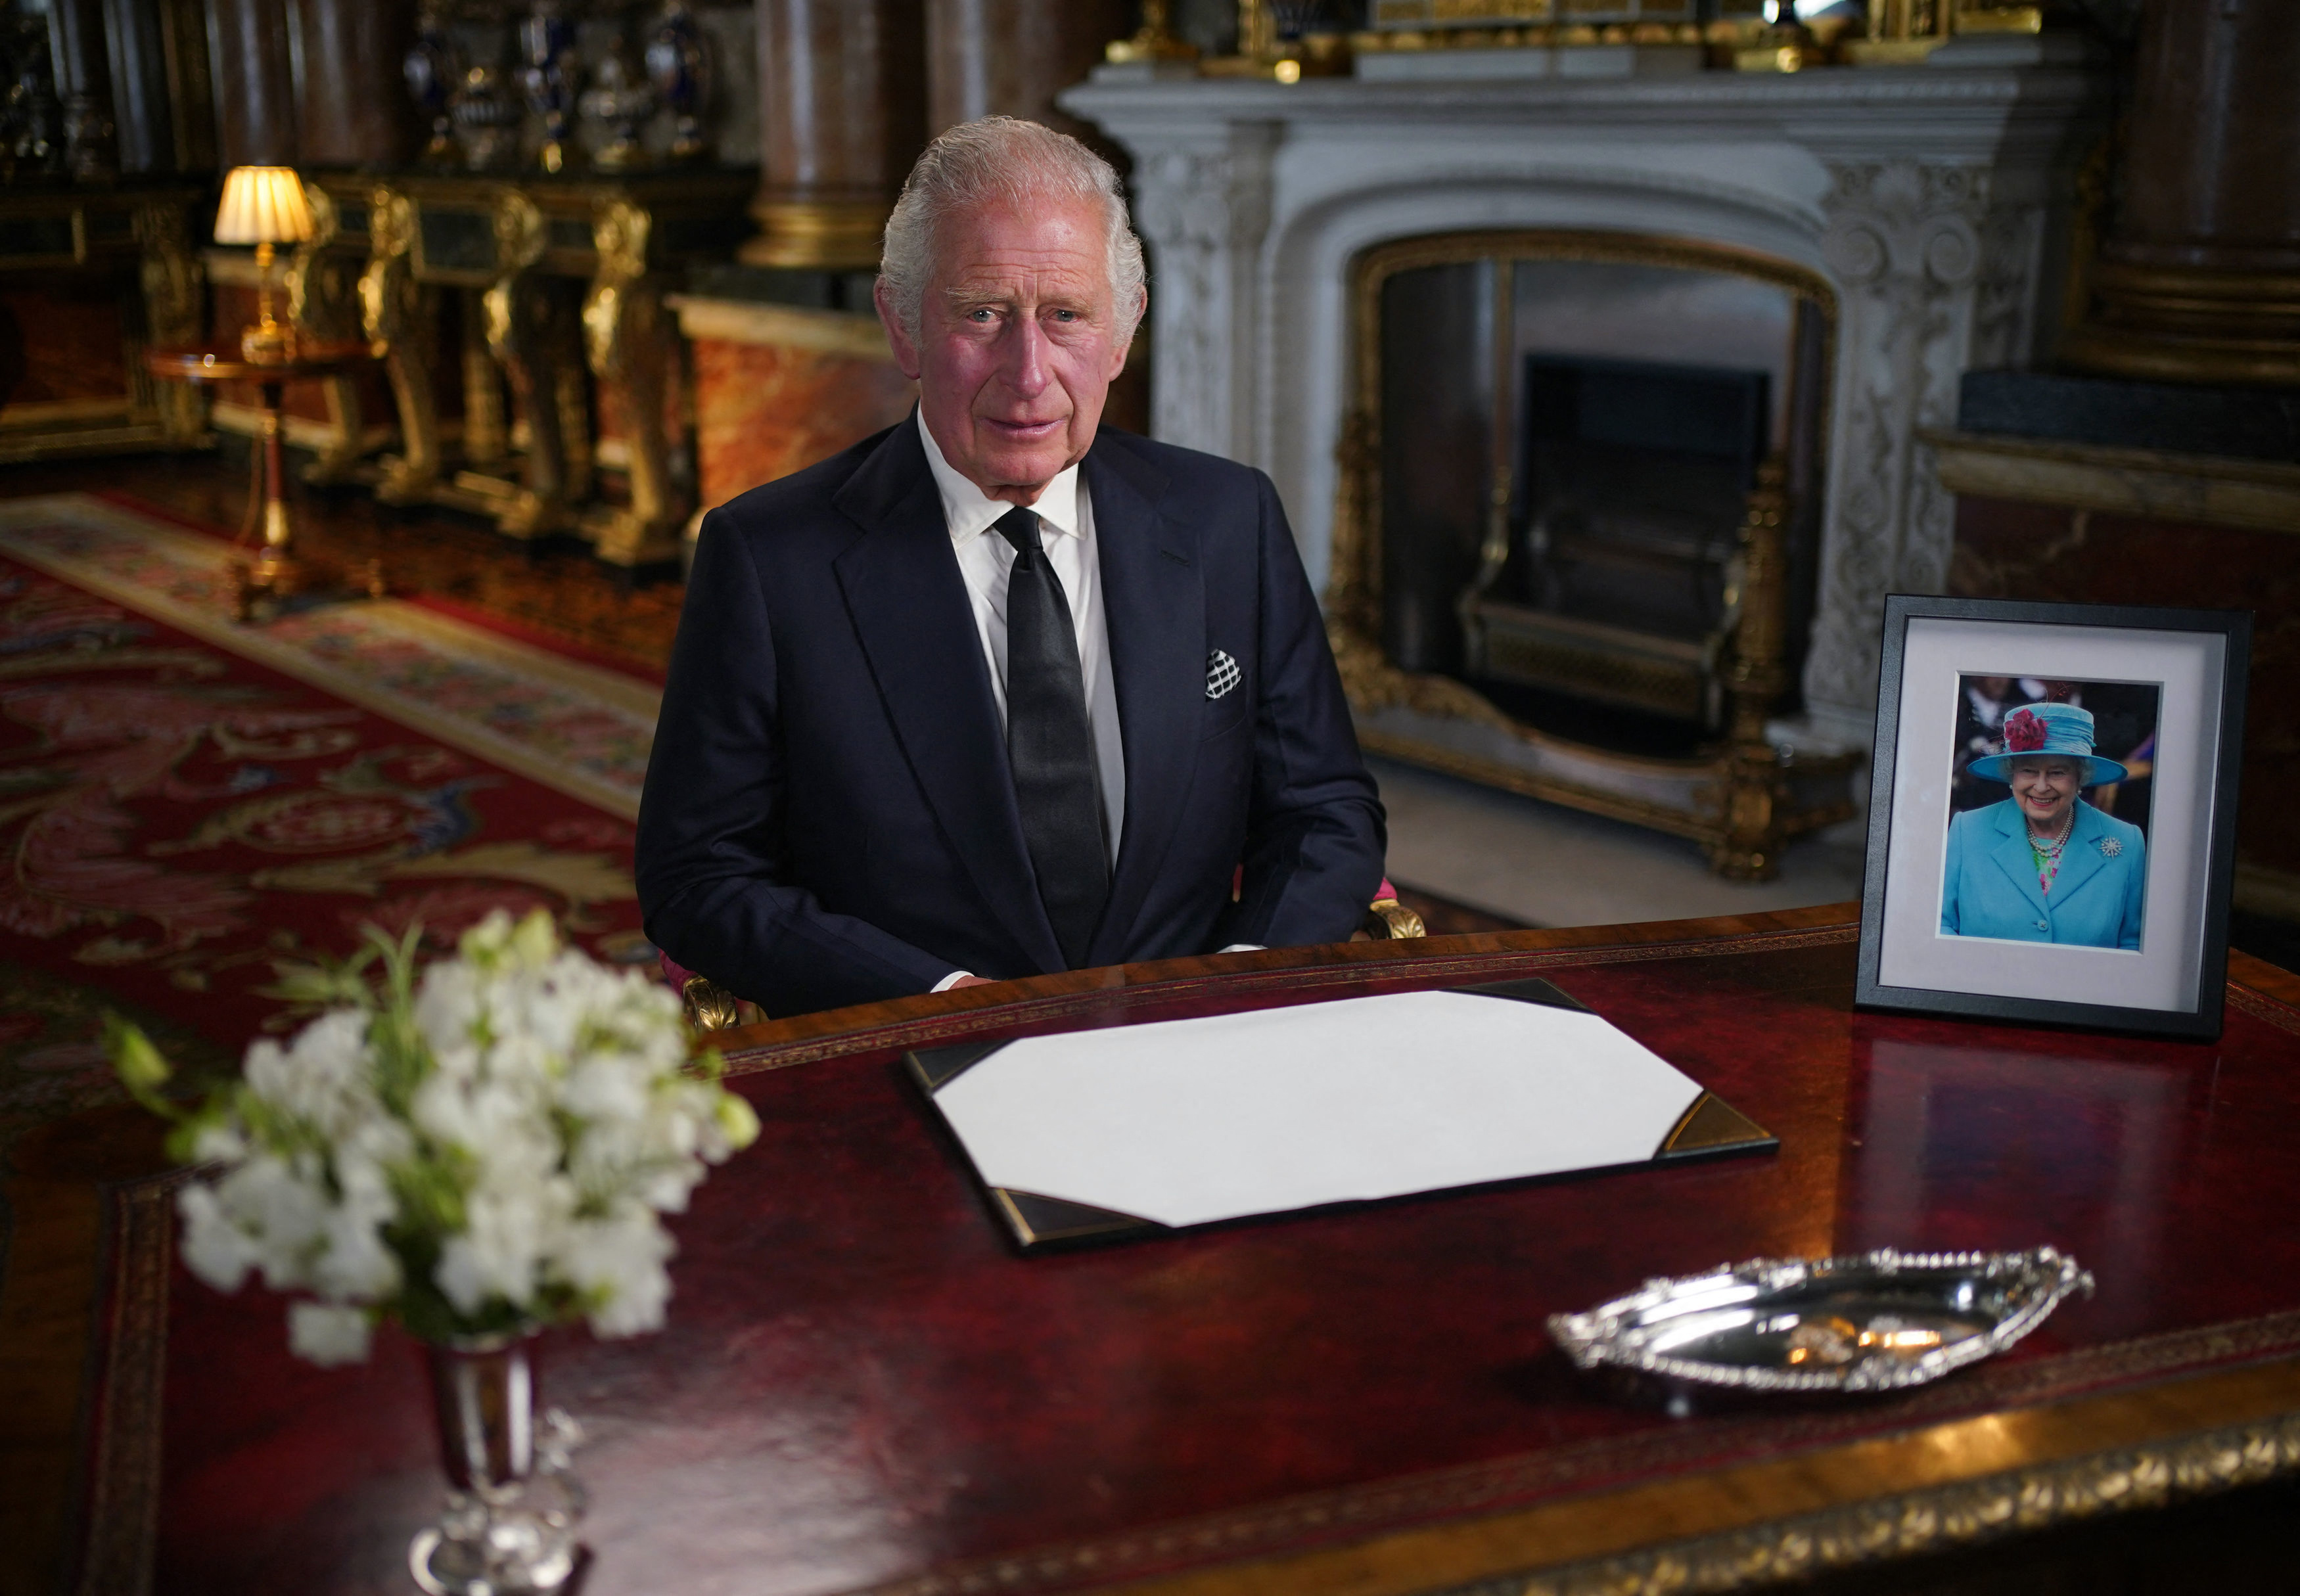 King Charles III as he made a televised address to the Nation and the Commonwealth from the Blue Drawing Room at Buckingham Palace in London on September 9, 2022, a day after Queen Elizabeth II's death | Source: Getty Images